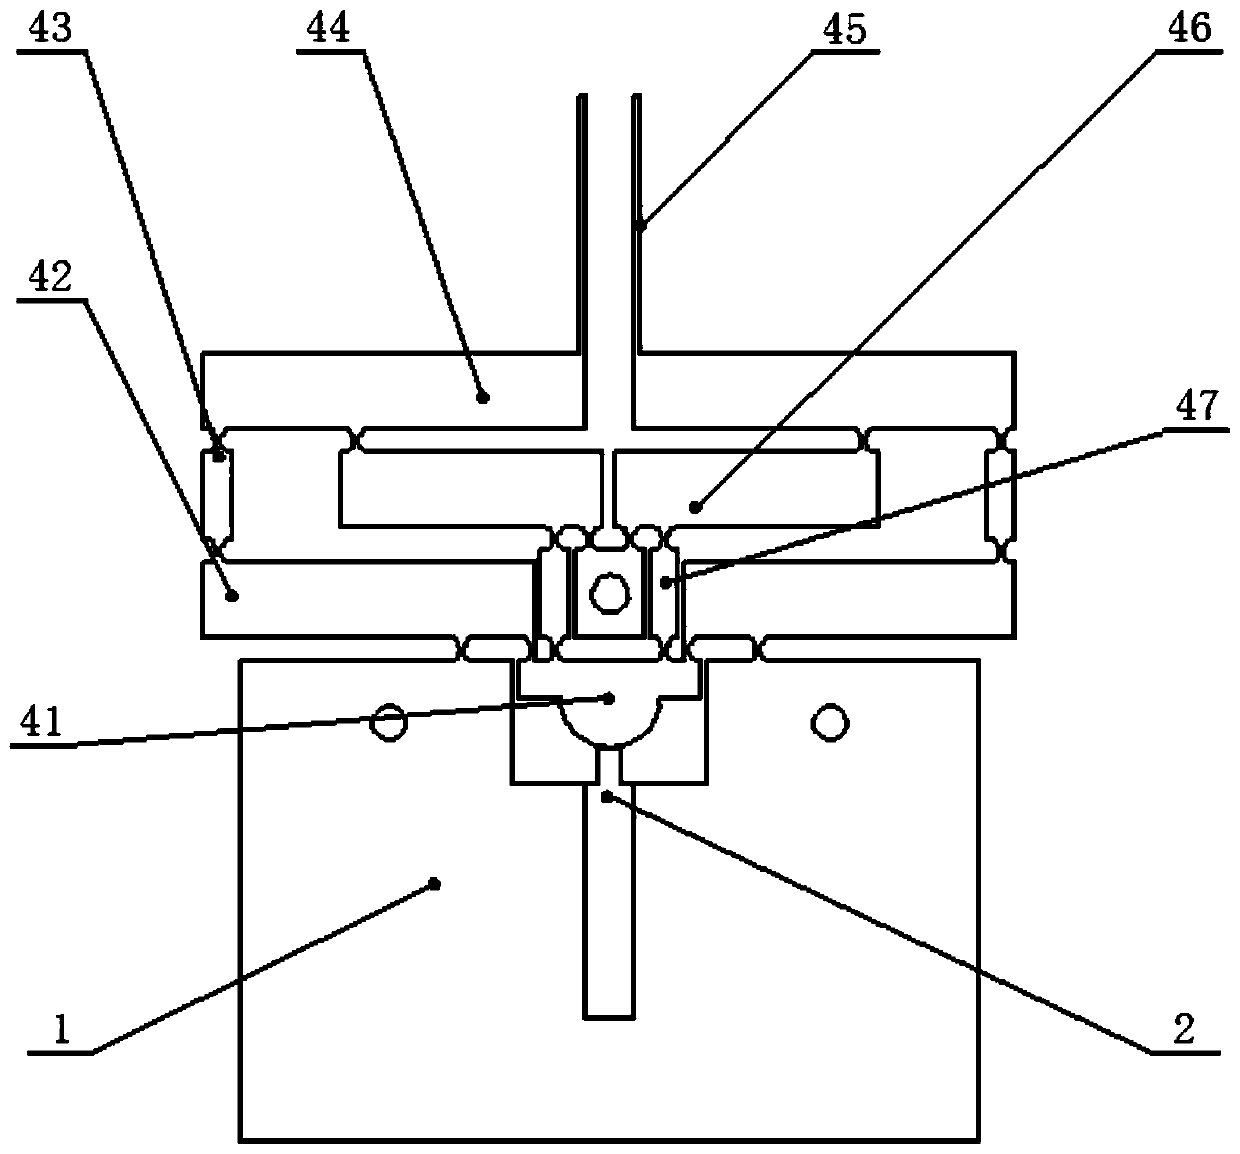 A three-degree-of-freedom ultrasonic vibration-assisted machining precision positioning platform